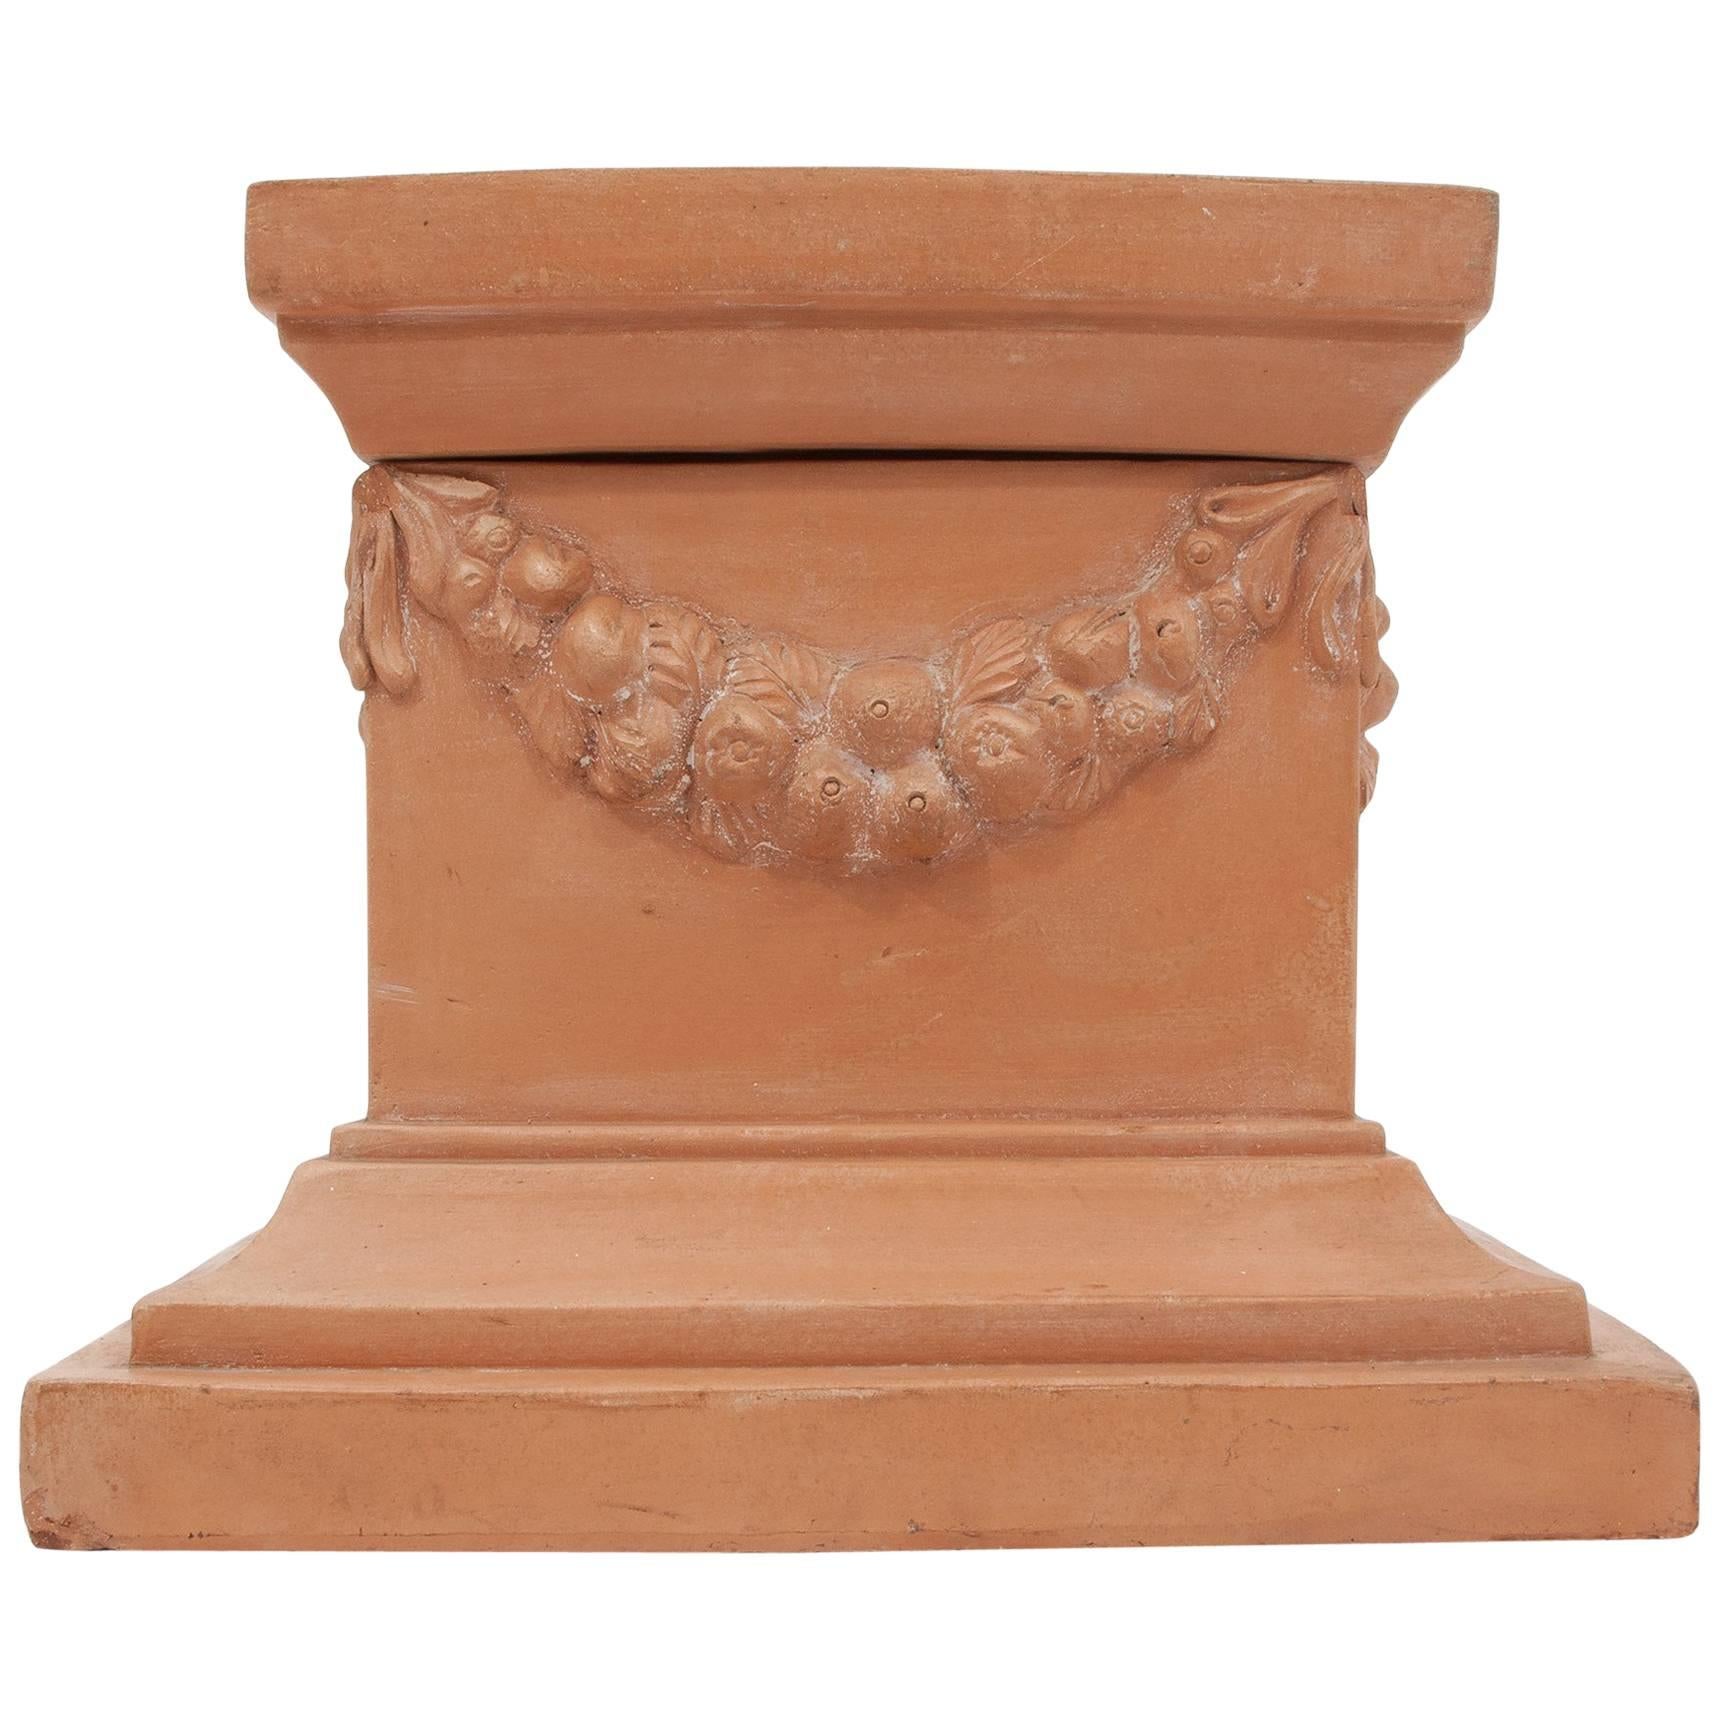 Terracotta Base for Vase or Statue or Lamp from Italy